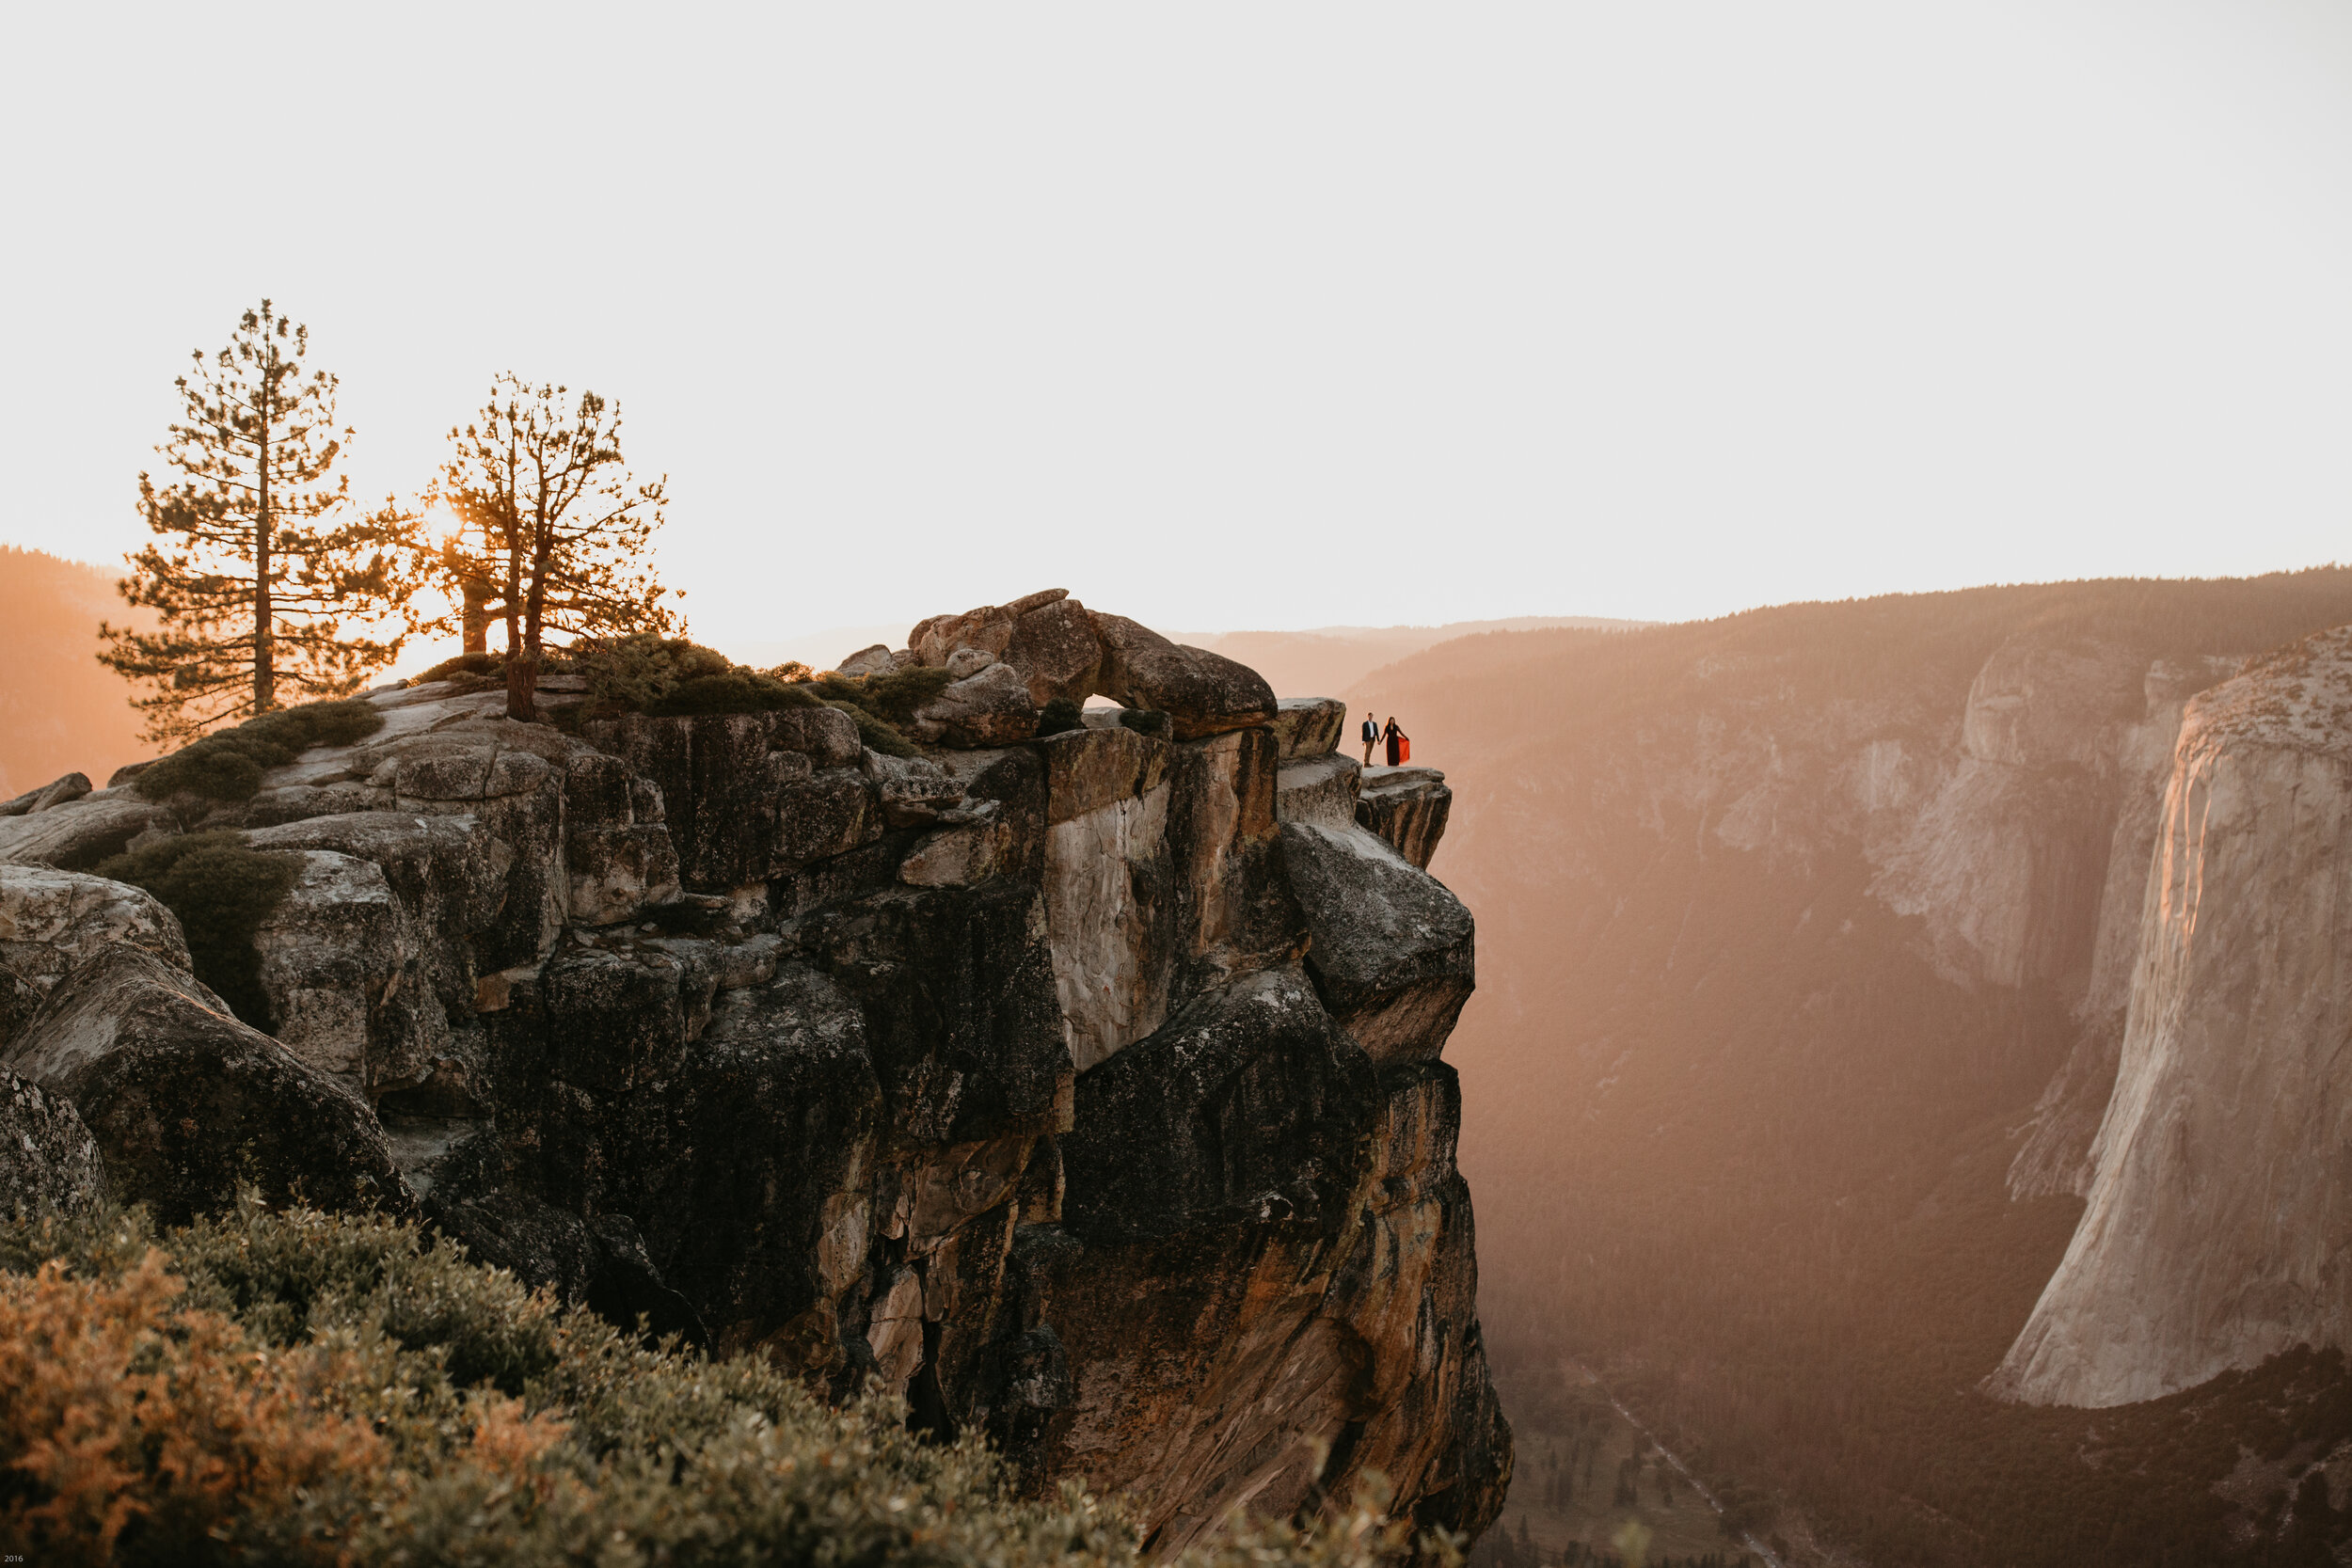 yosemite-national-park-couples-session-at-taft-point-and-yosemite-valley-yosemite-elopement-photographer-nicole-daacke-photography-156.jpg